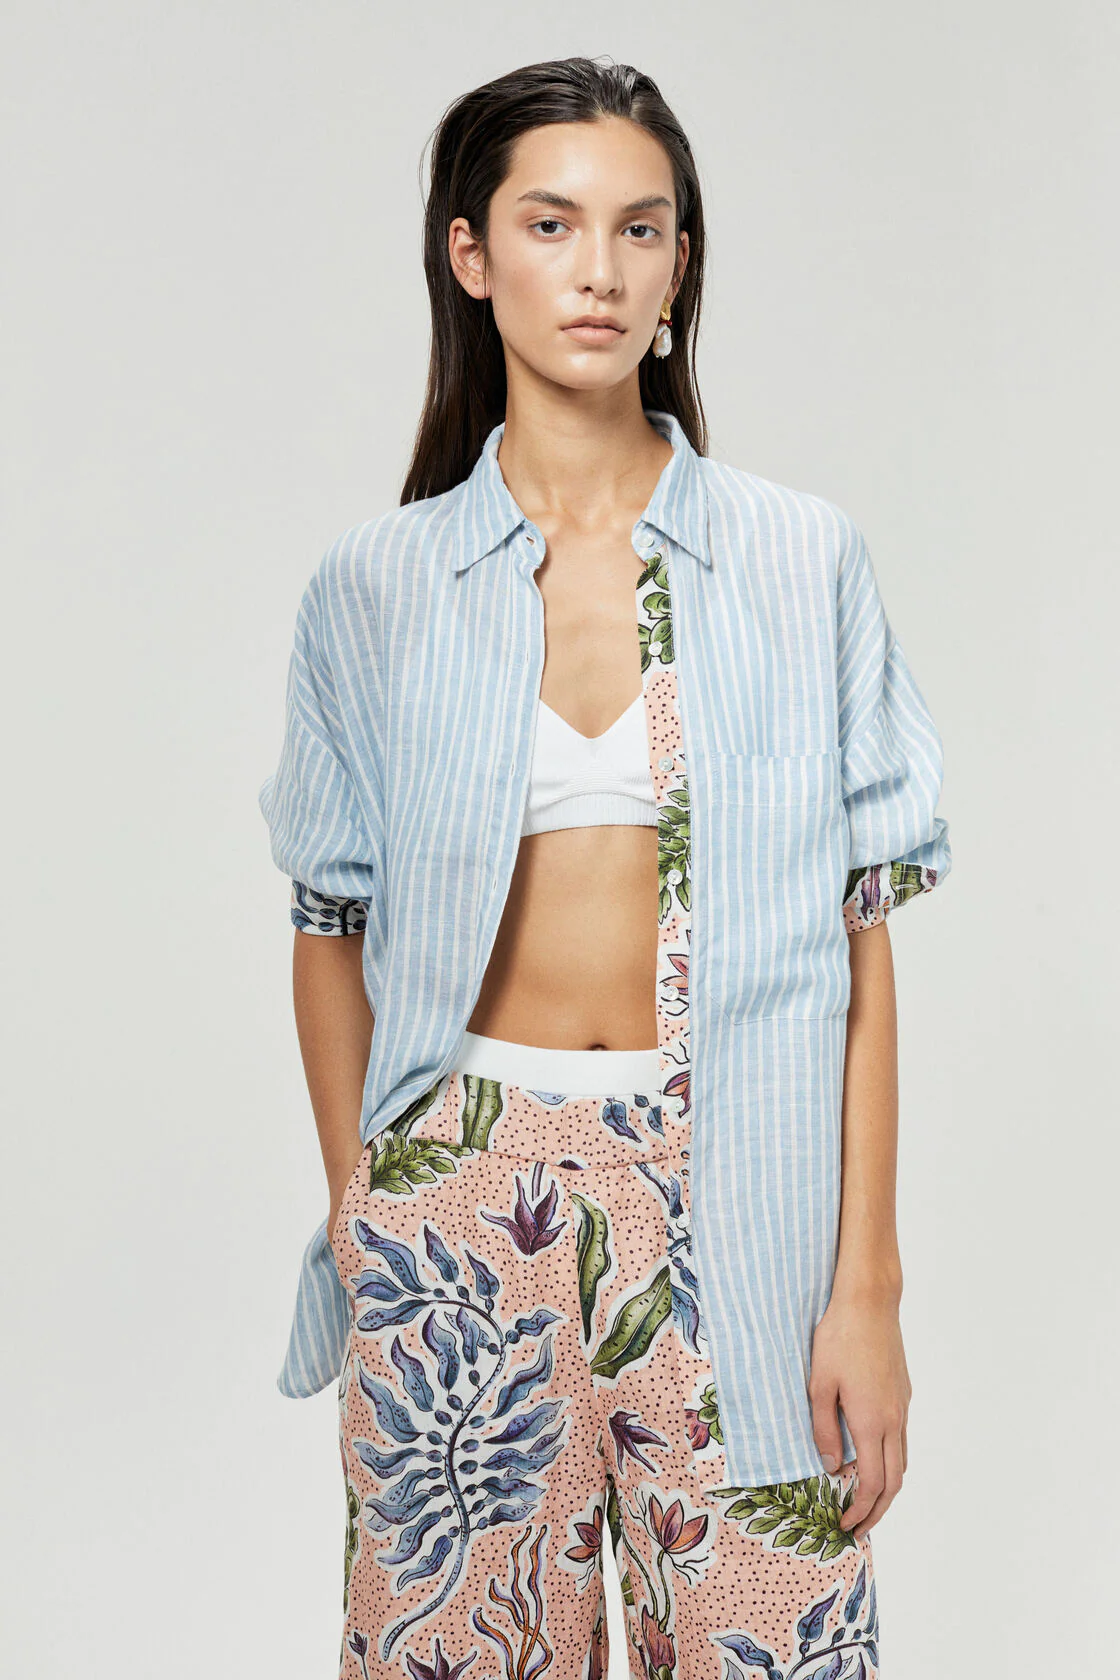 Island Linen Shirt - Light Blue and White Stripes with Contrasting Details